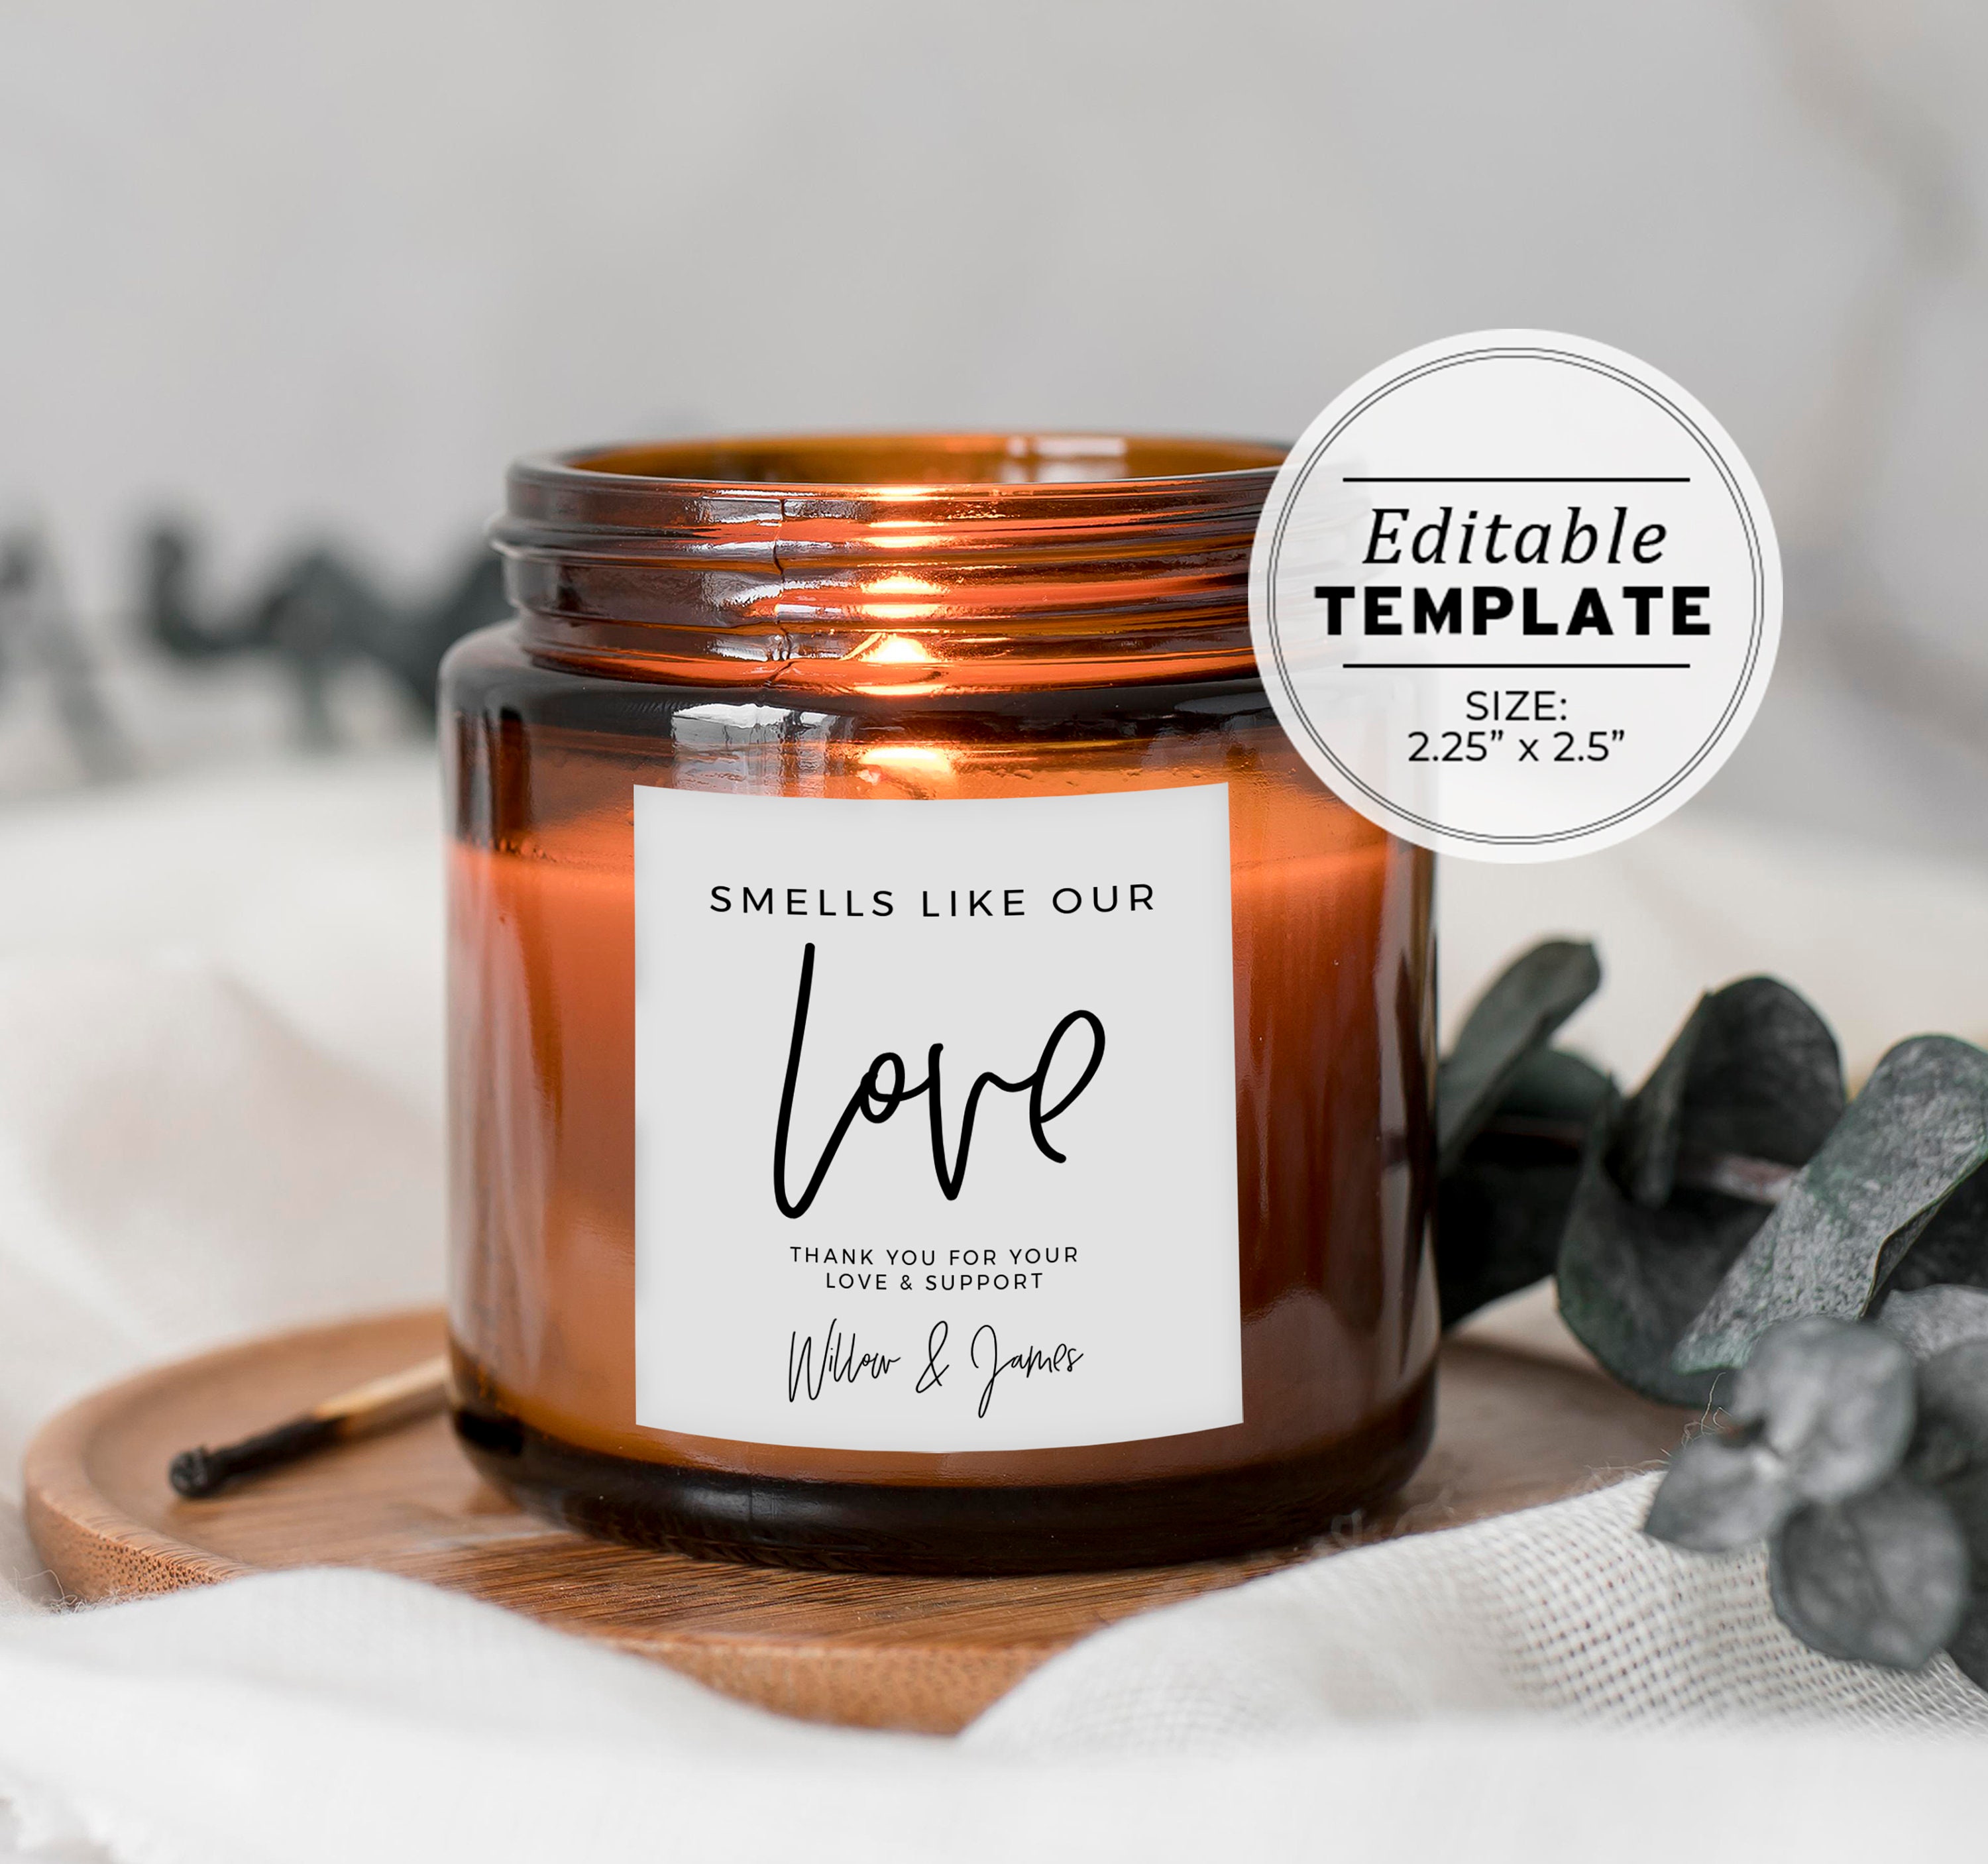 Luxury Candle Label Template Candle Label Sticker Candle Warning